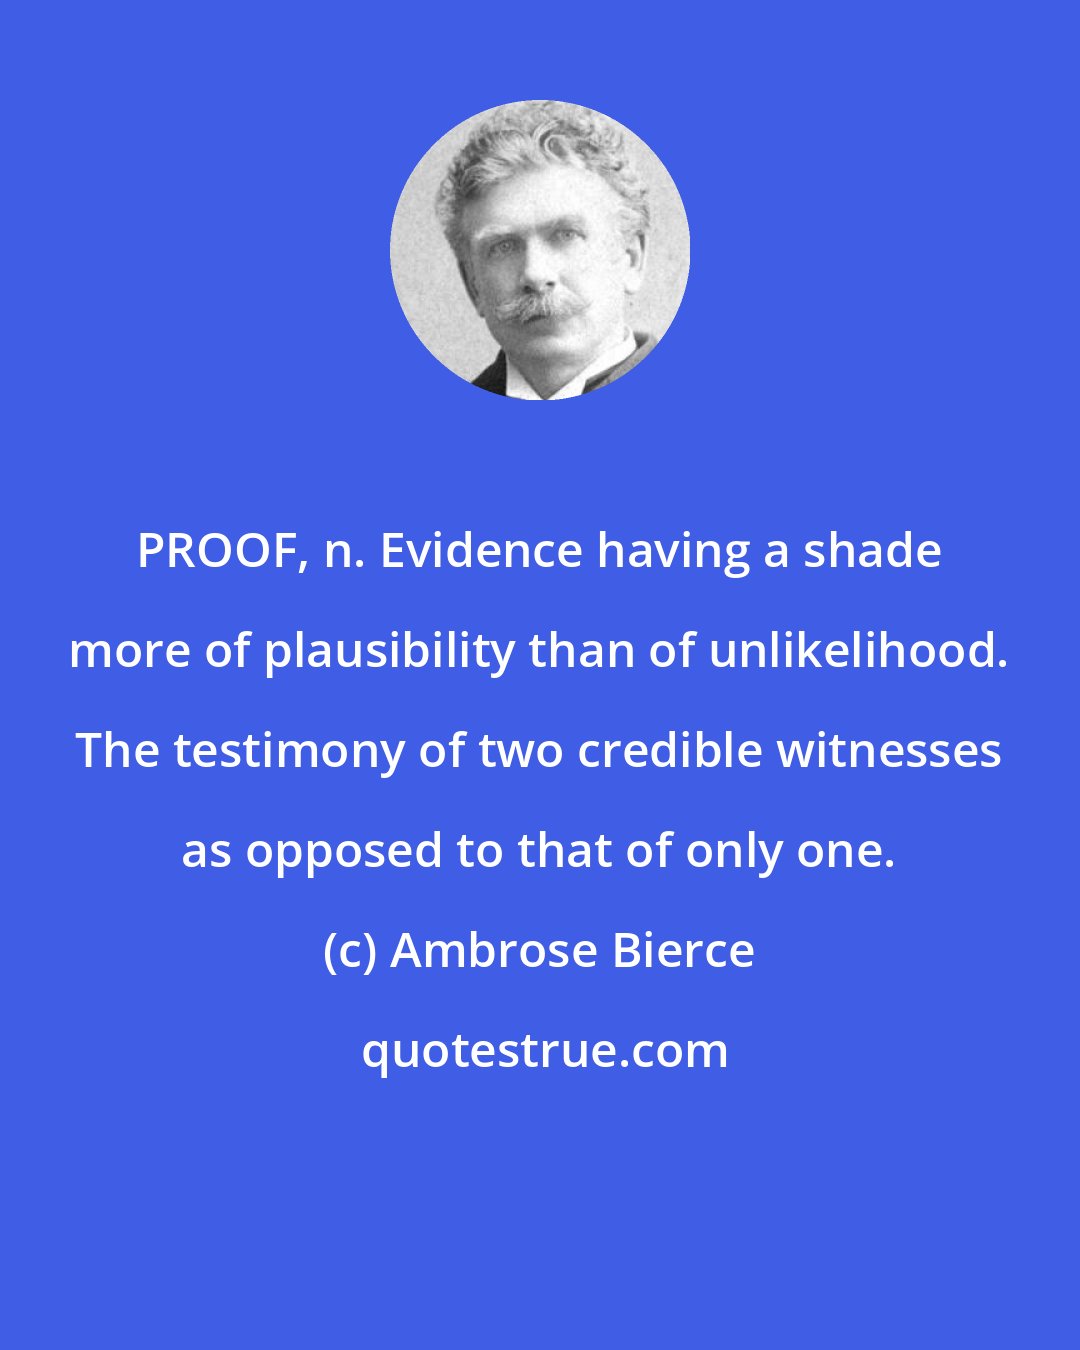 Ambrose Bierce: PROOF, n. Evidence having a shade more of plausibility than of unlikelihood. The testimony of two credible witnesses as opposed to that of only one.